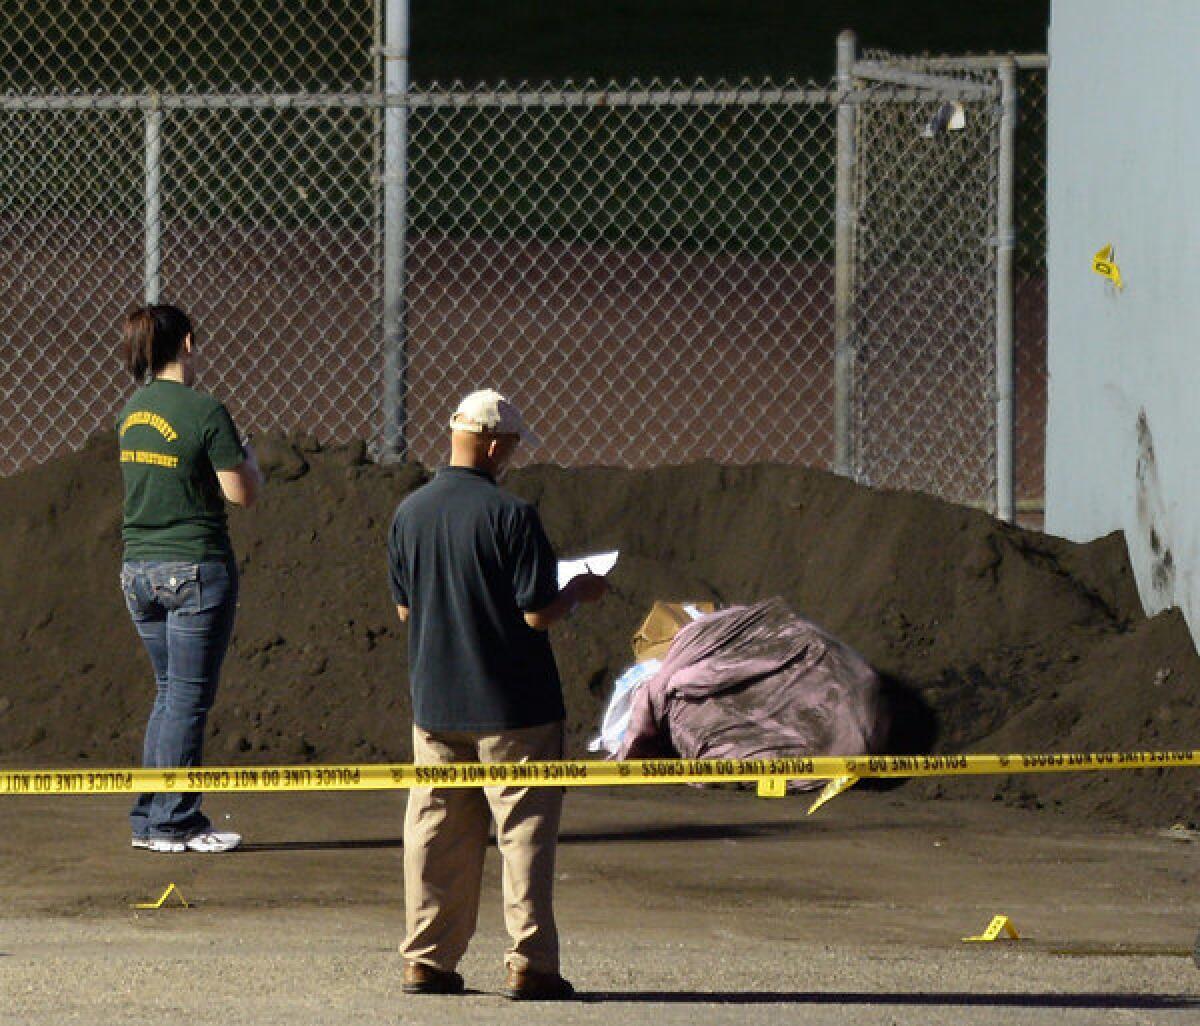 Investigators look over the scene where a body was found in a bag Thursday at a park in Manhattan Beach.